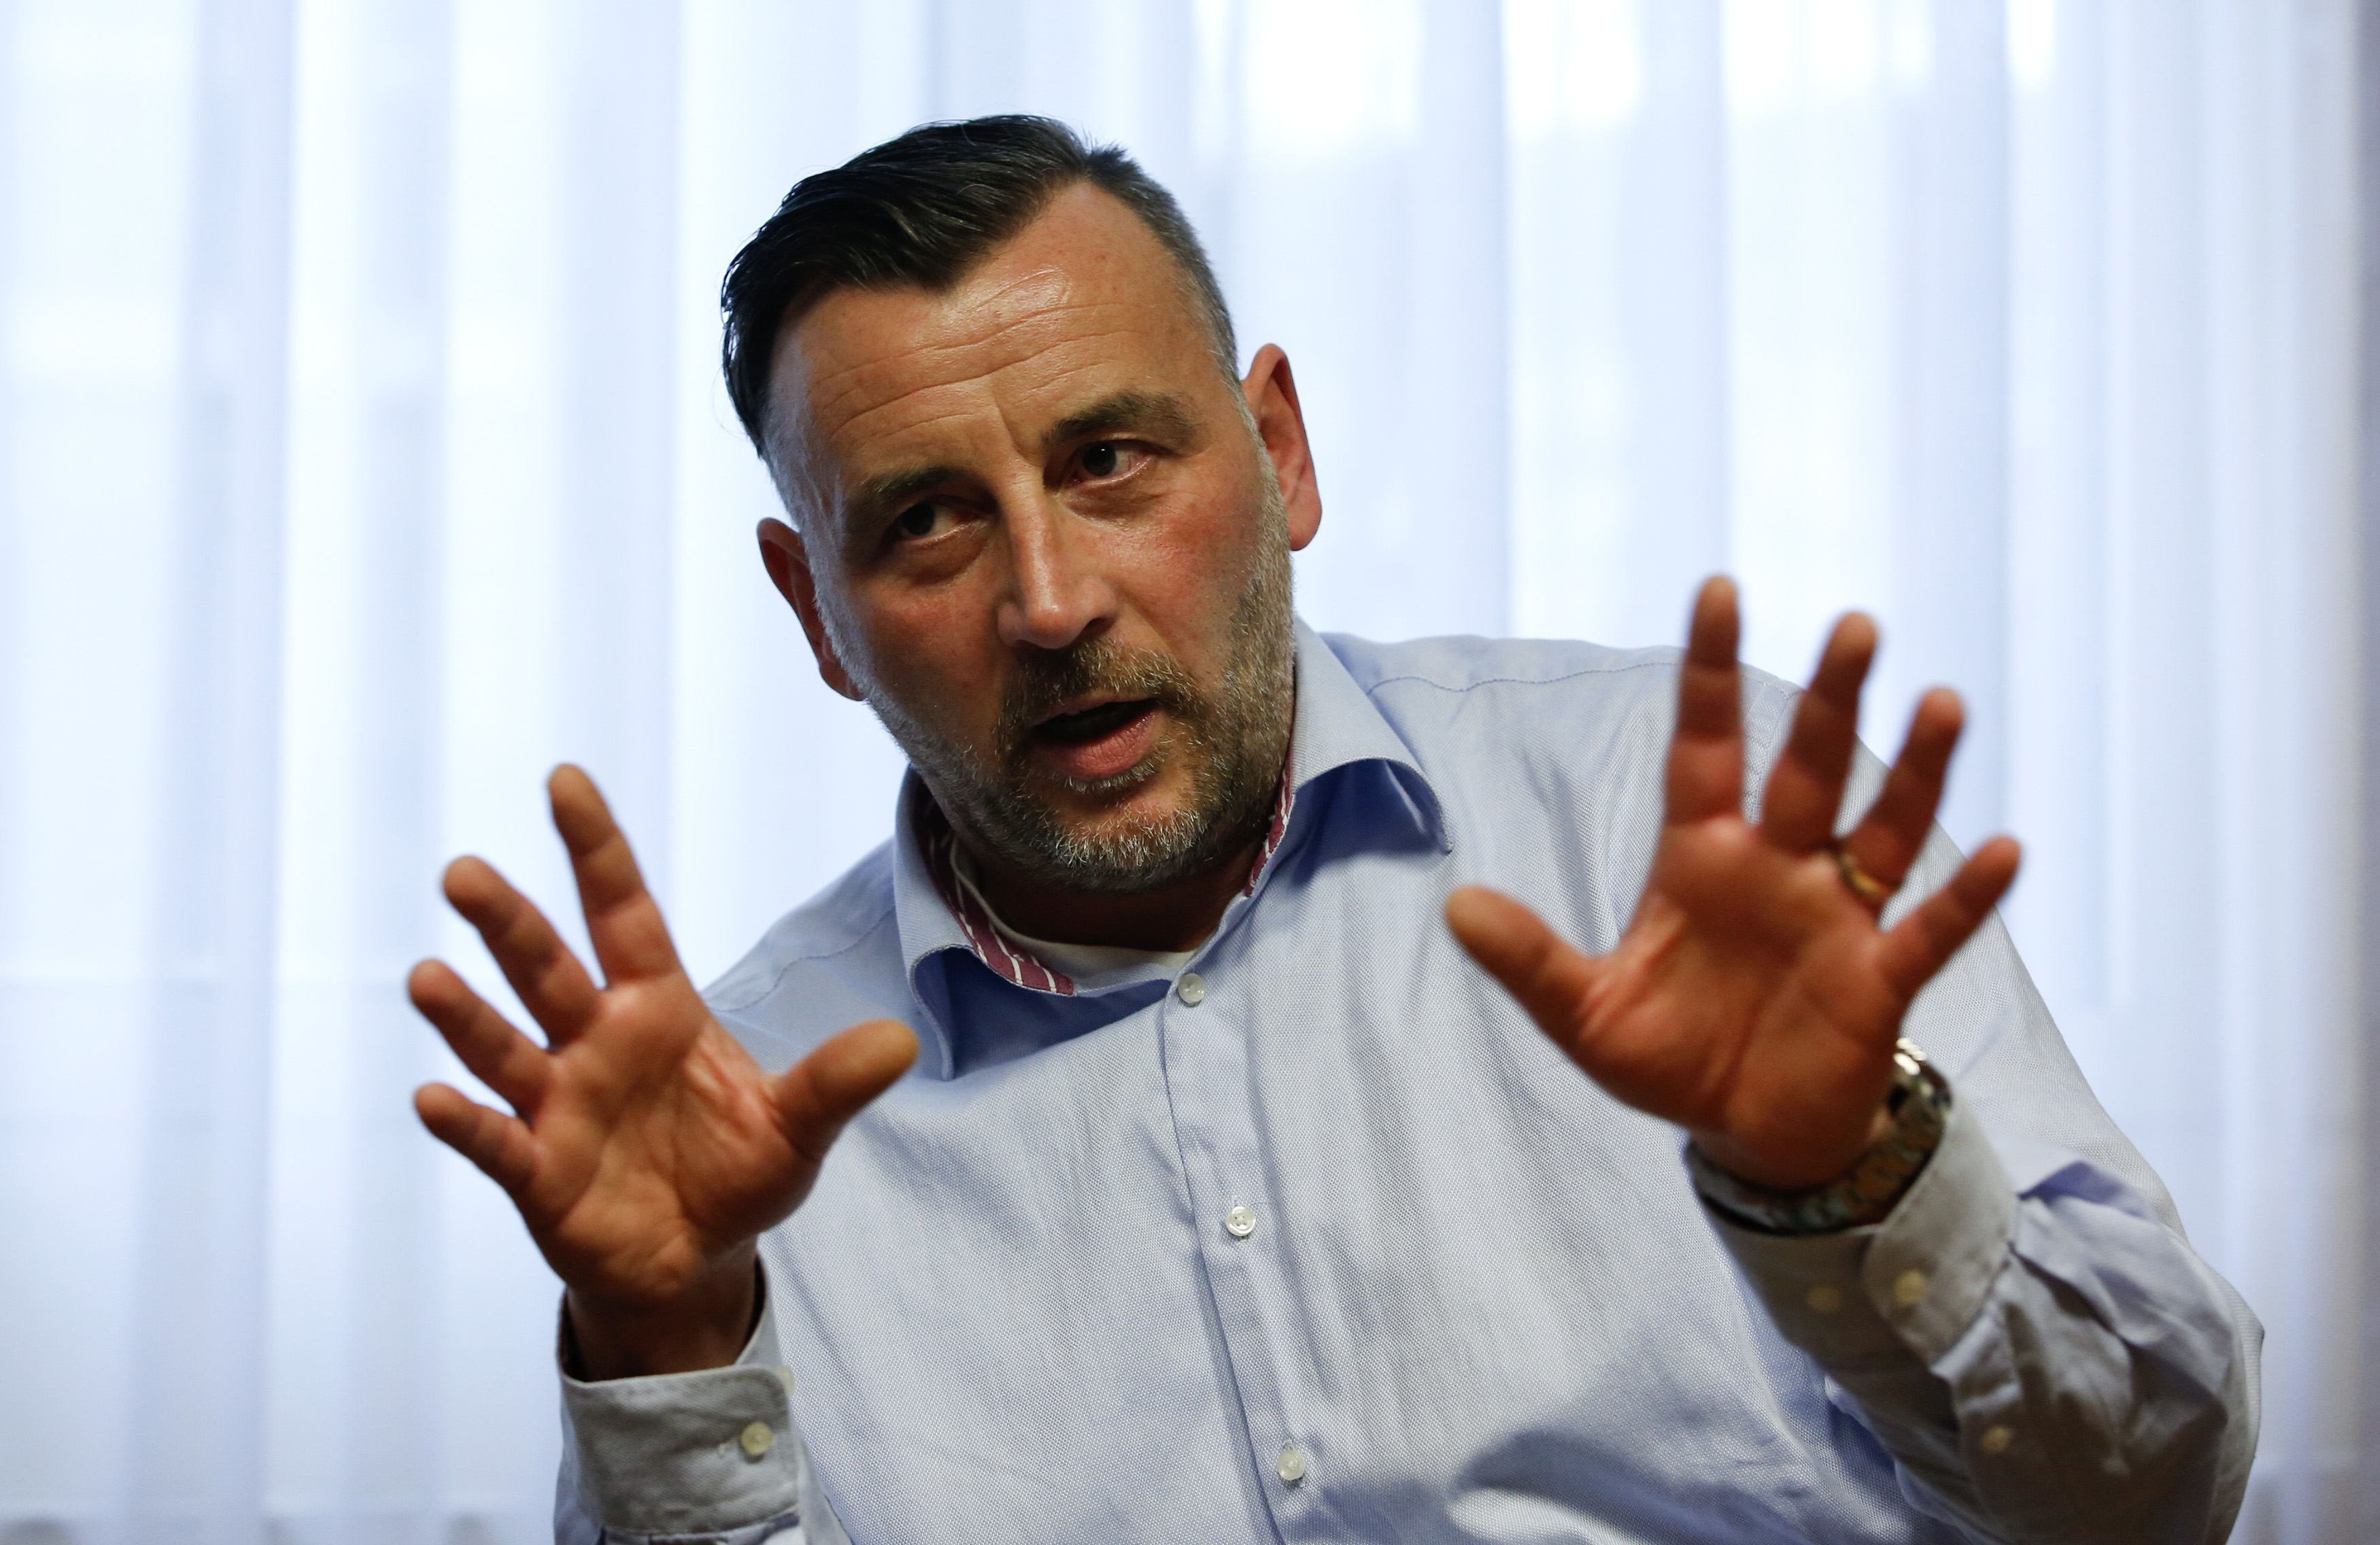 Bachmann, co-leaders of anti-immigration group PEGIDA, a German abbreviation for "Patriotic Europeans against the Islamization of the West", gestures during a Reuters interview in Dresden